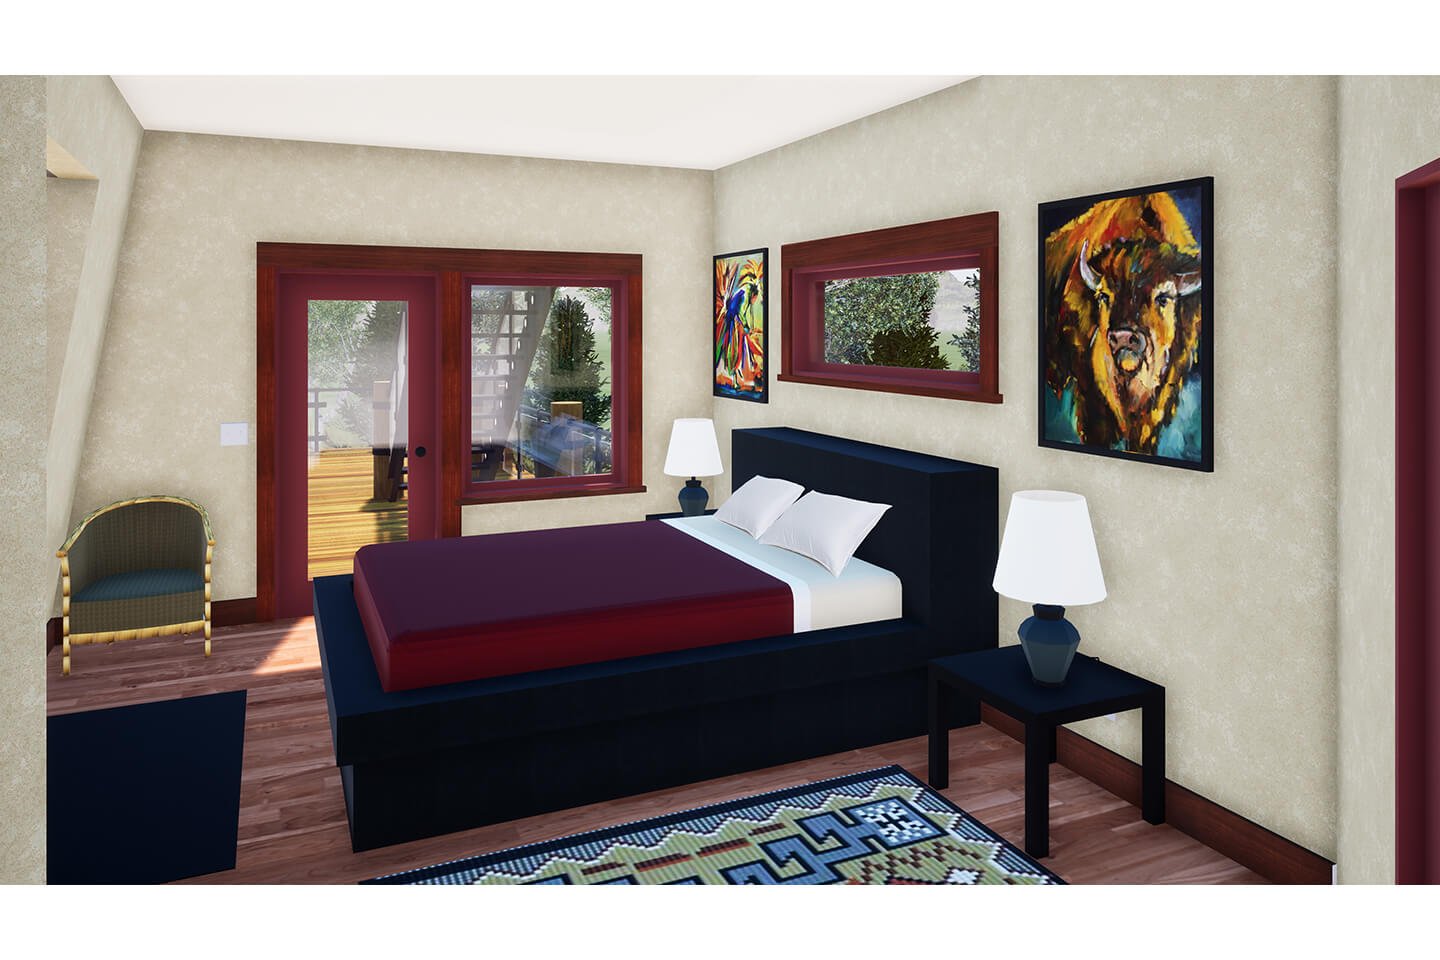 3D rendering of bedroom with artwork on wall